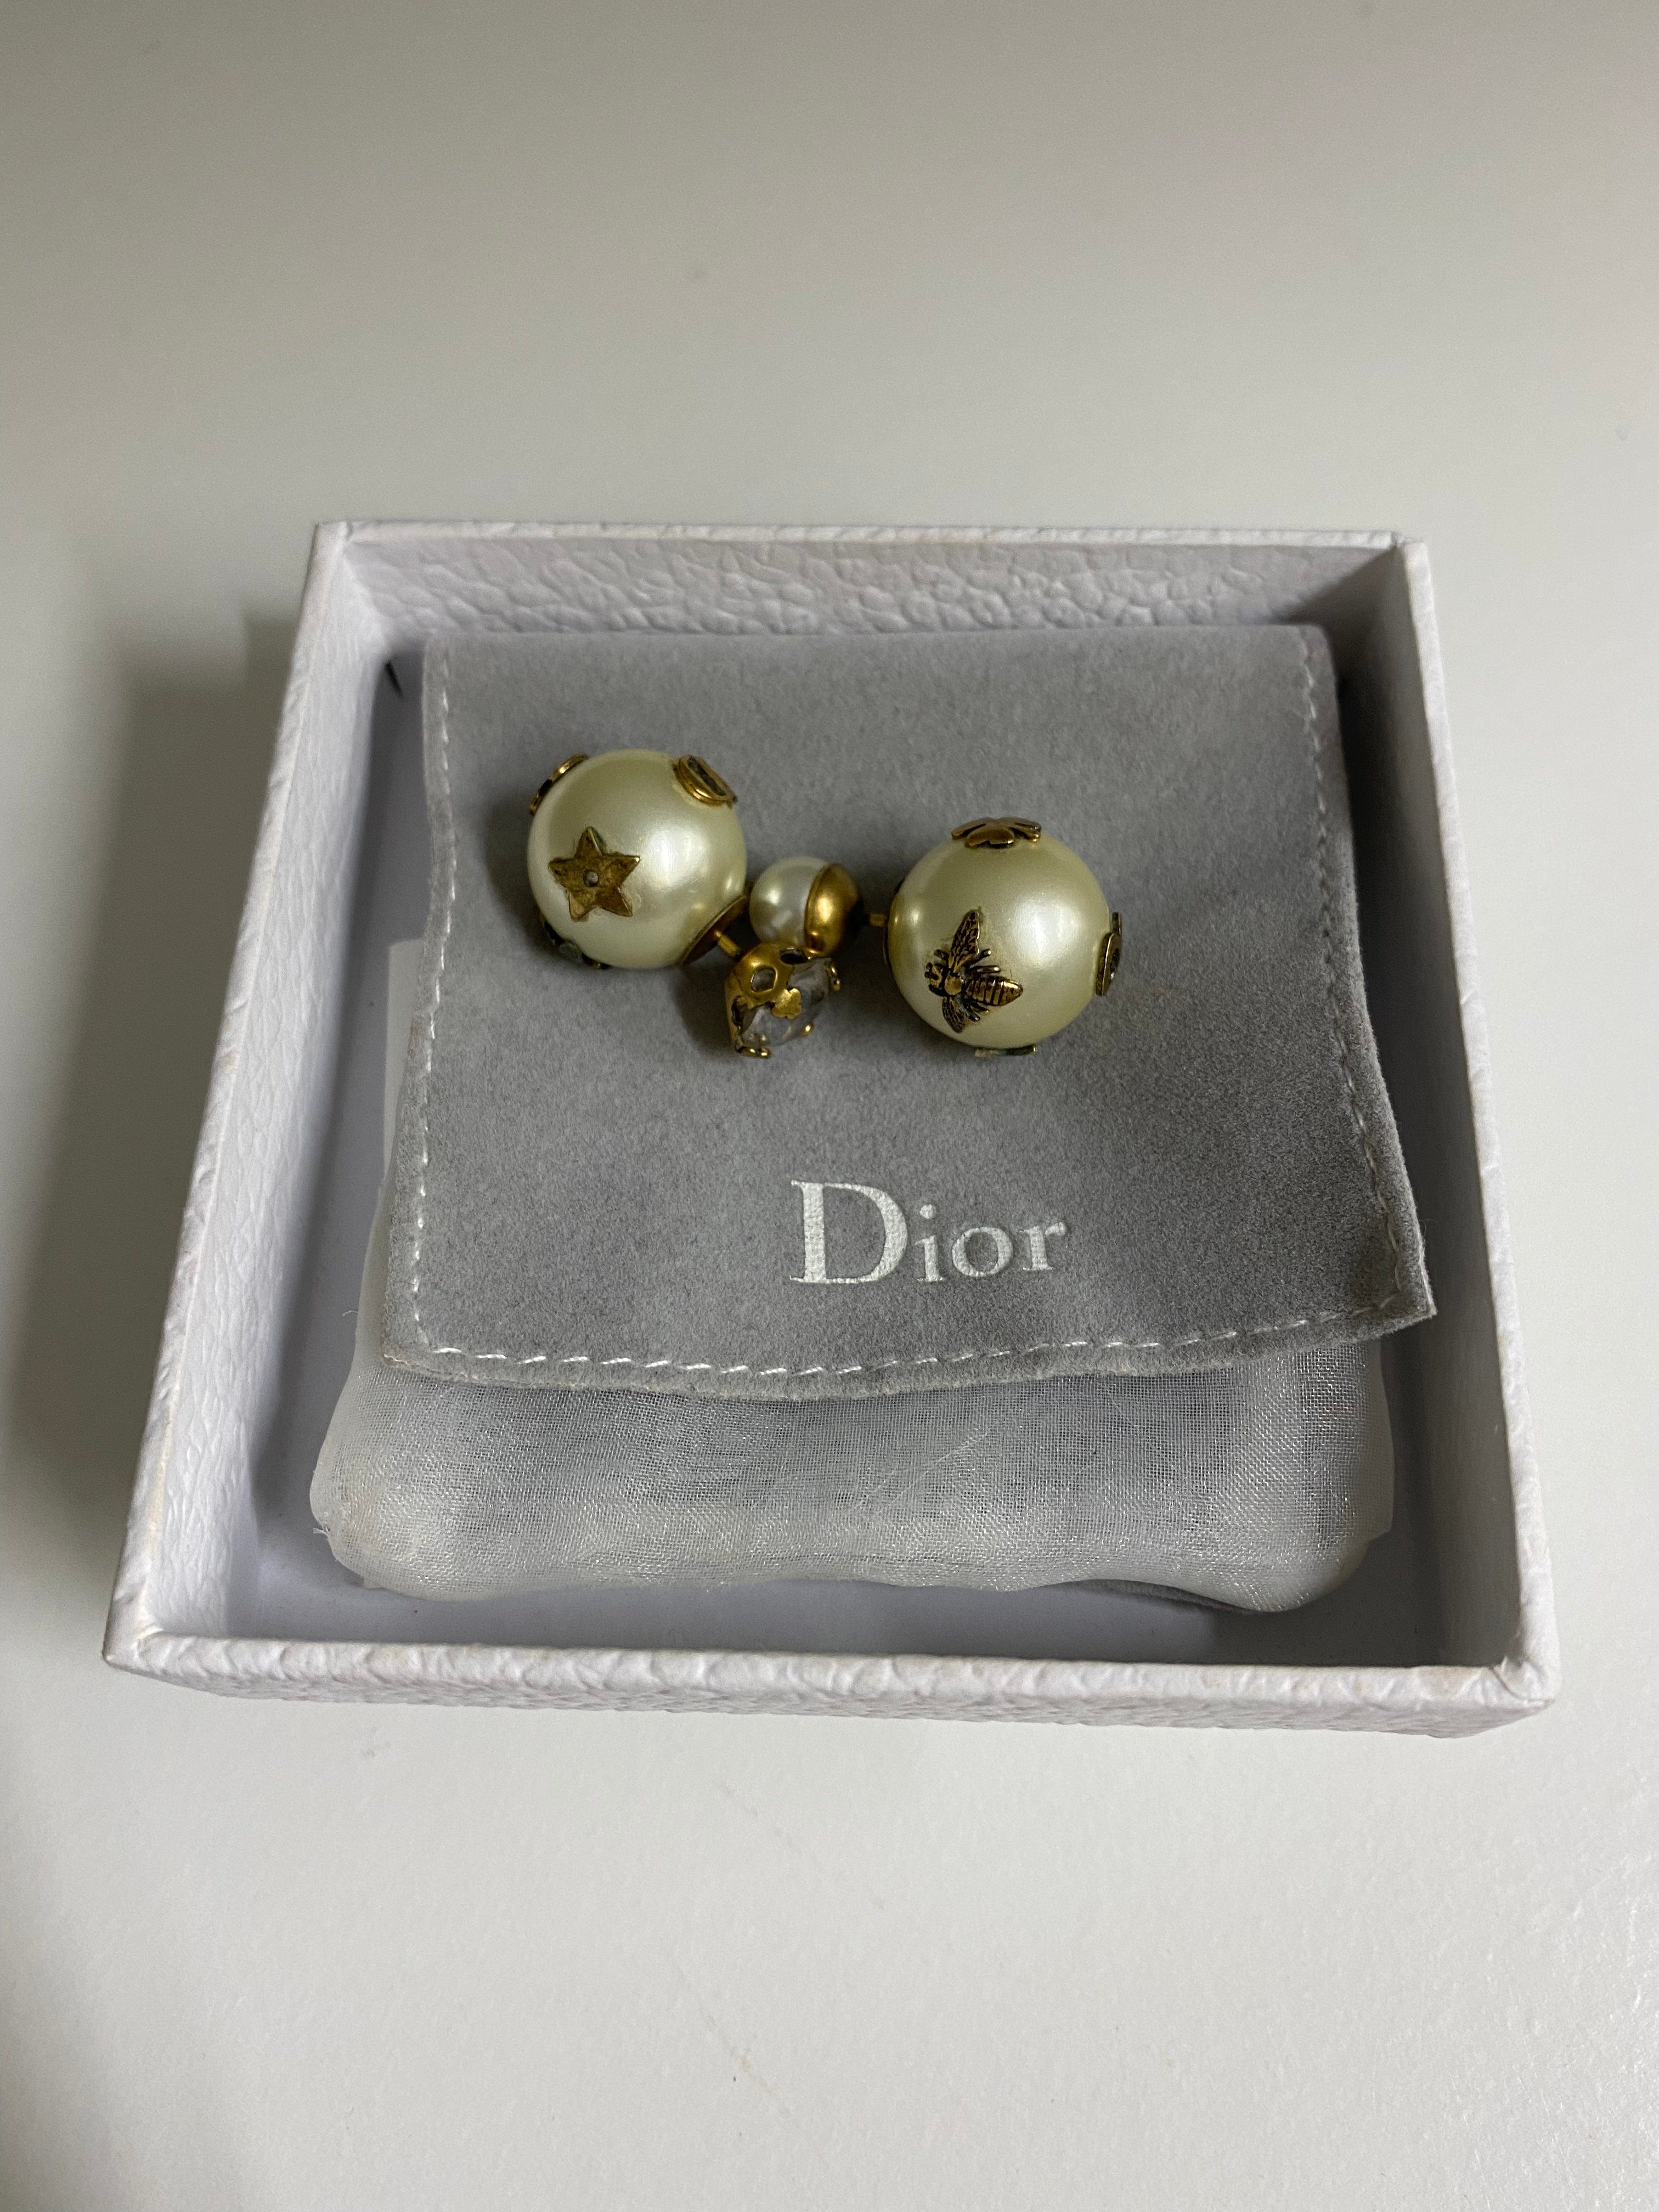 Christian Dior Dior tribale earrings, with box - AEC1059